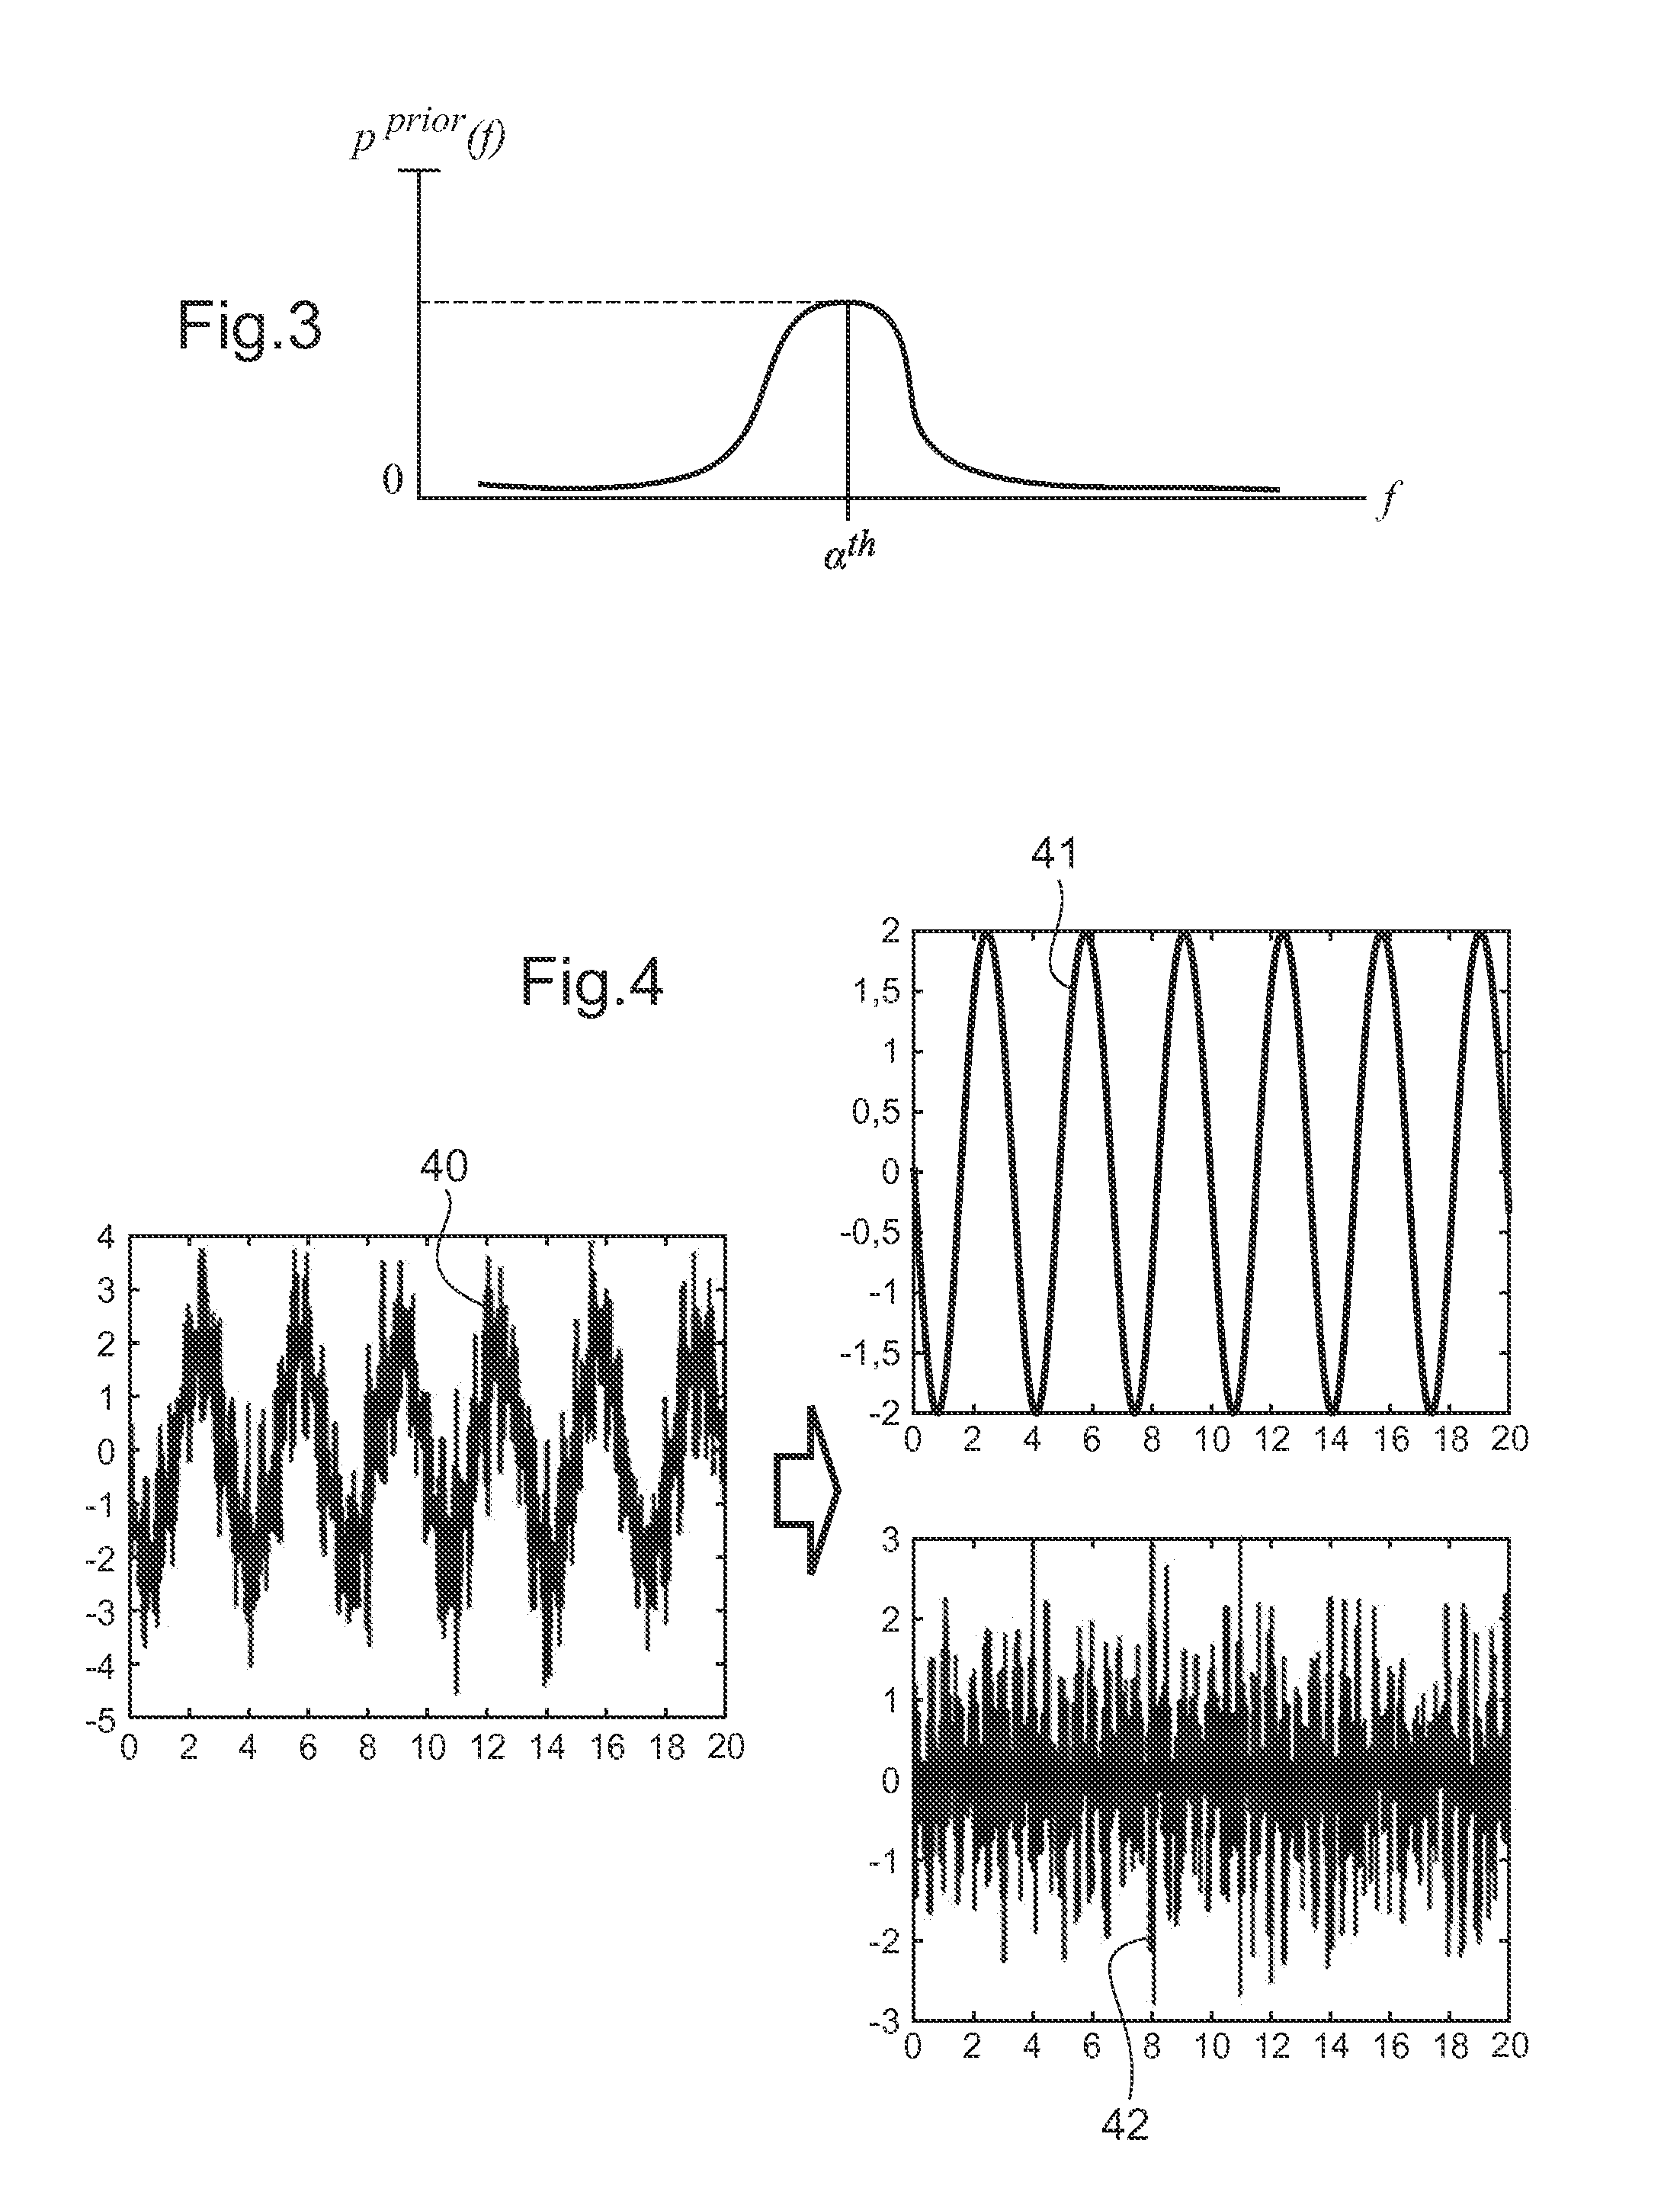 Method of detecting defects of a rolling bearing by vibration analysis